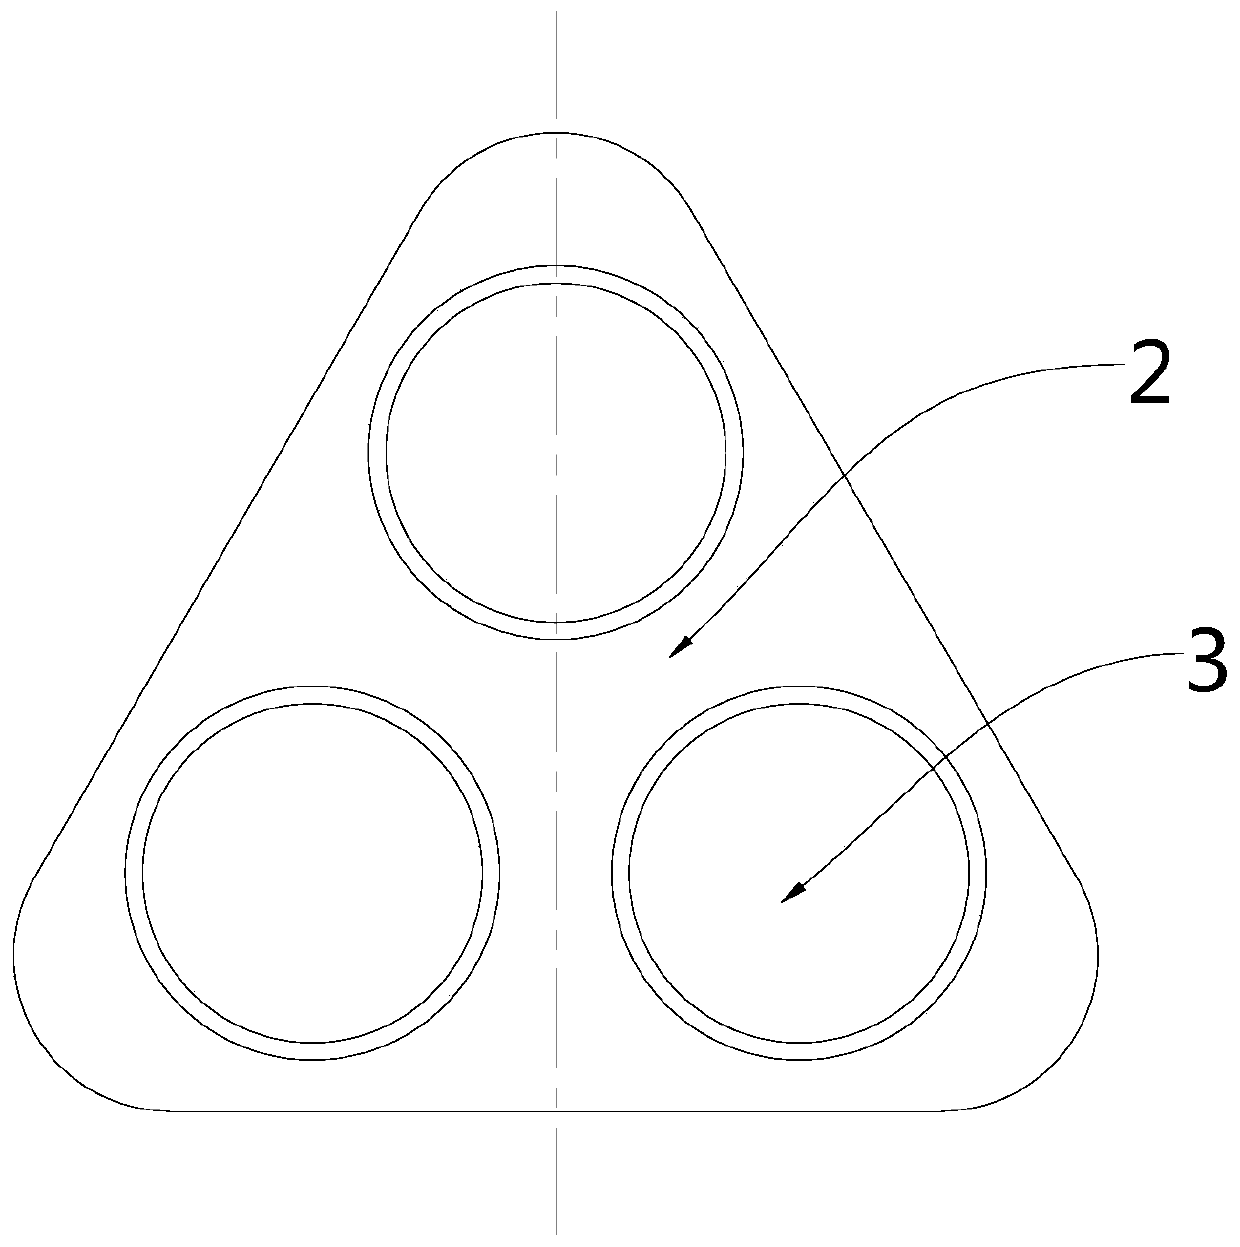 Three-lamp pole connection structure with regular triangular distribution